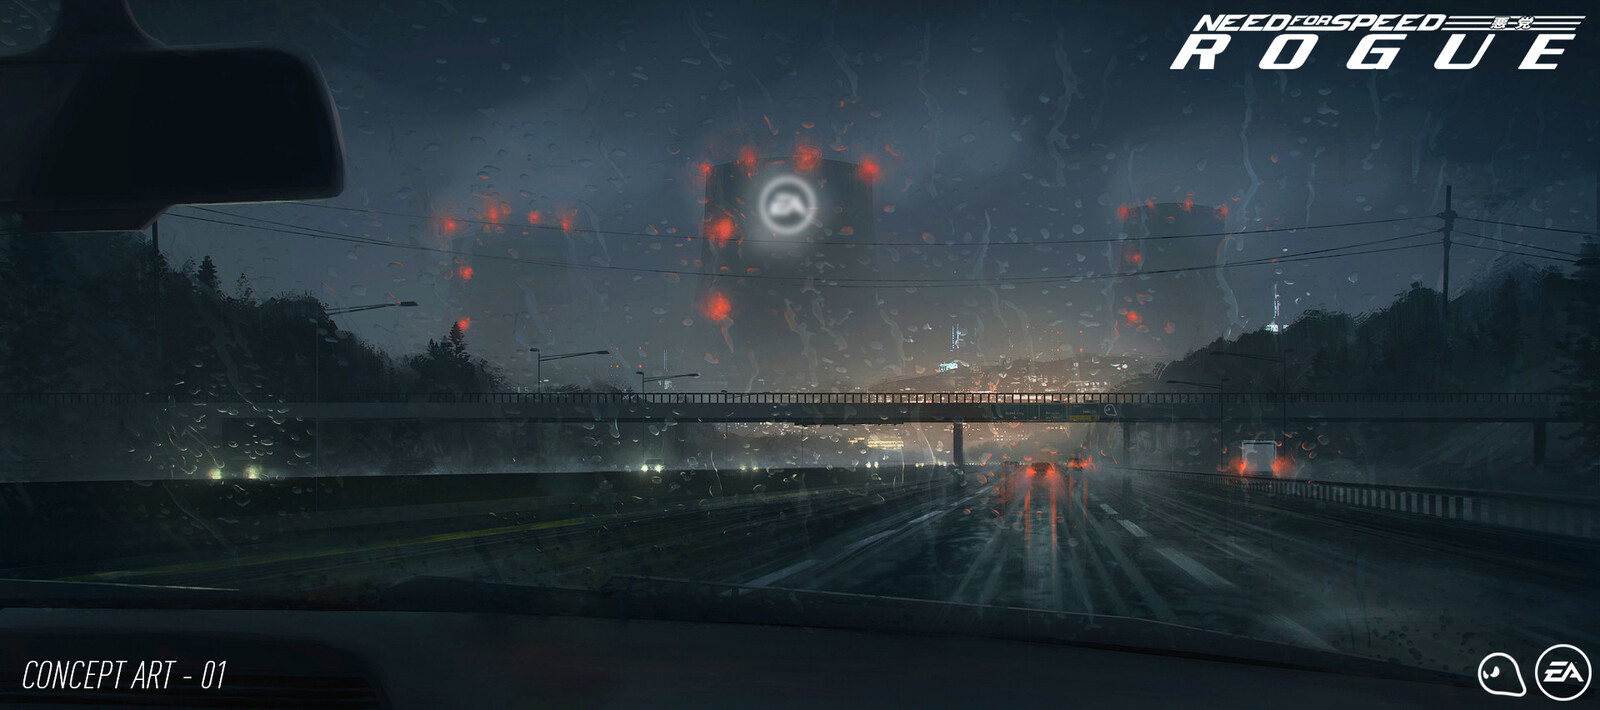 Need for Speed Rogue (Concept Art - 01)